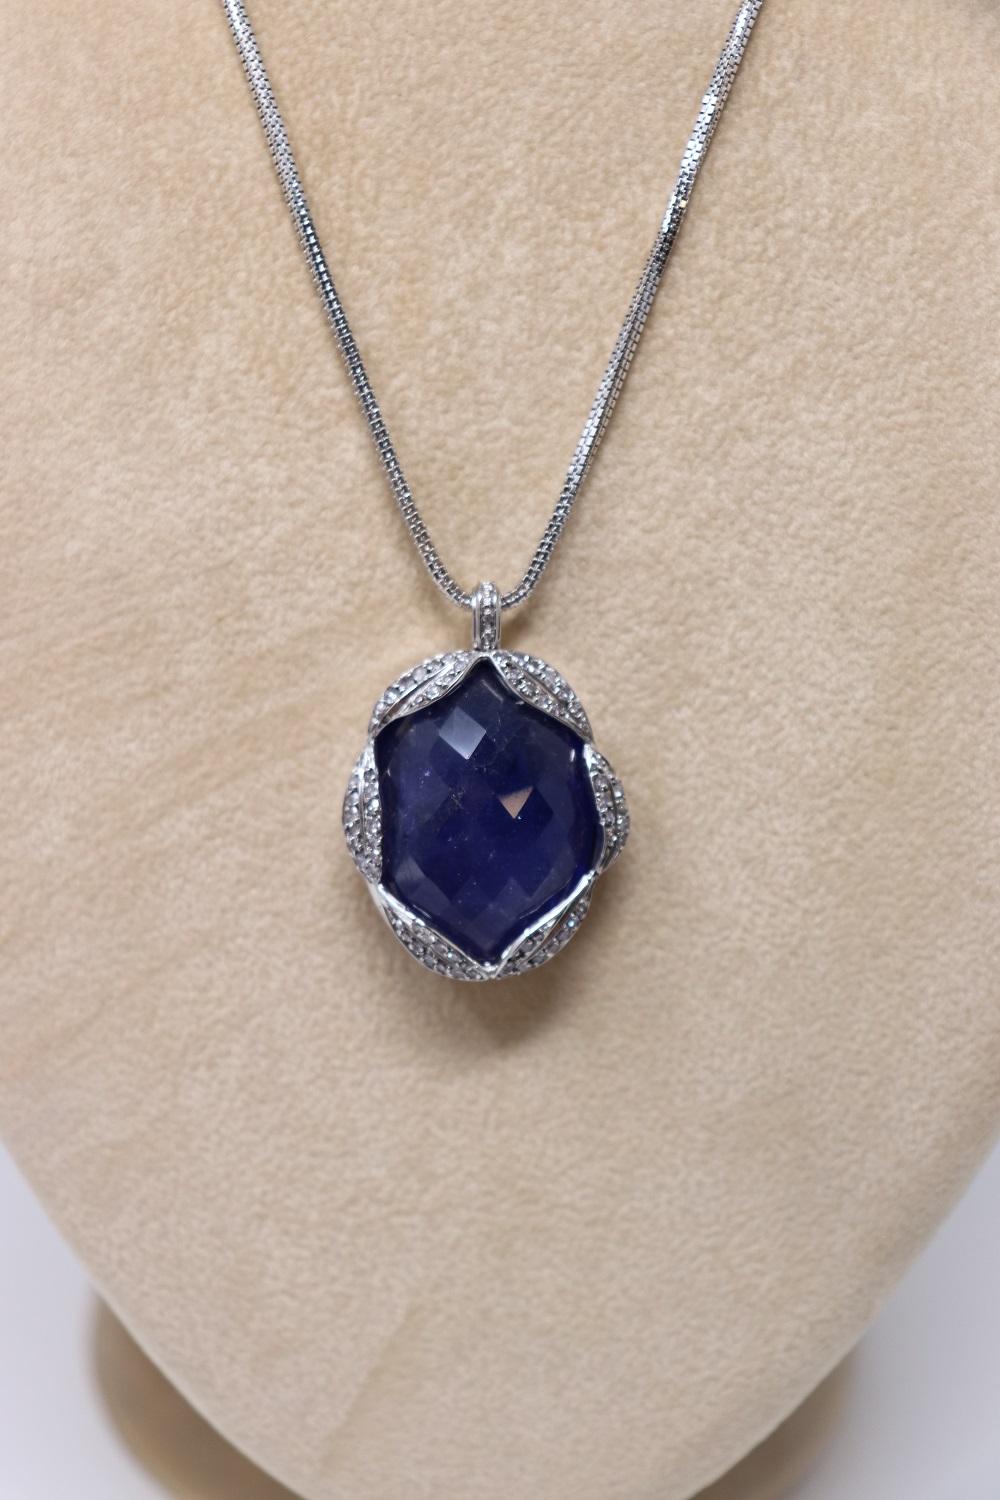 65 Ct Tanzanite and Diamond Pendant Necklace in 18 Kt White Gold In Excellent Condition For Sale In Bosco Marengo, IT